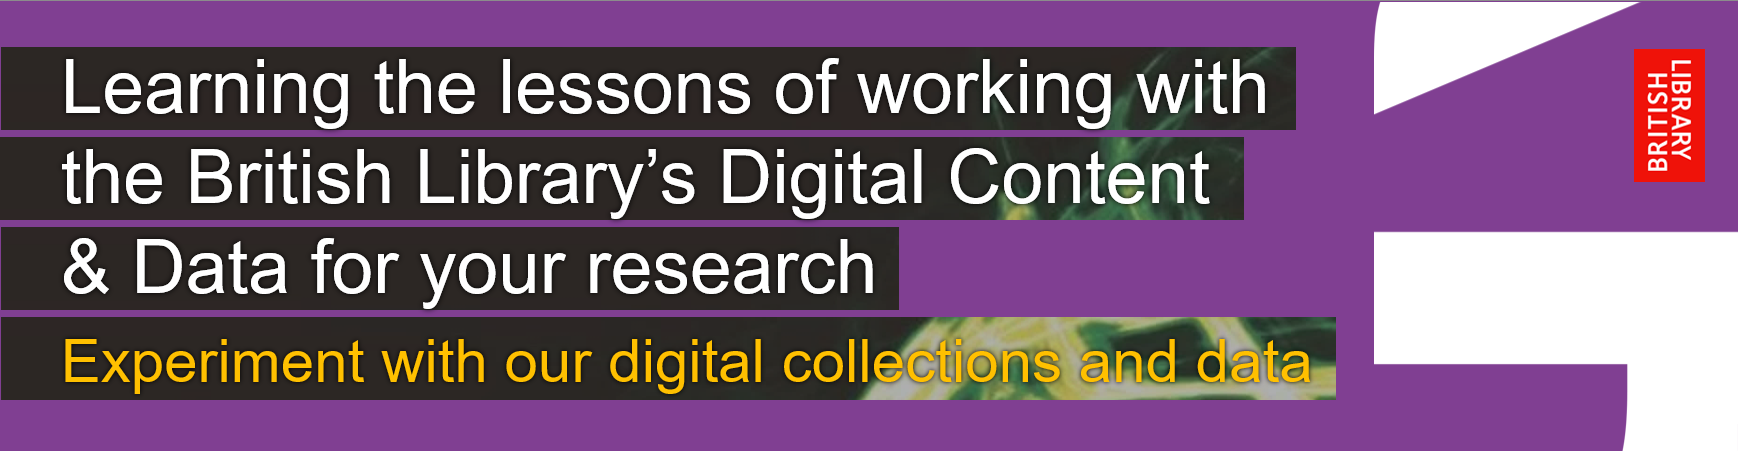 Learning the lessons of working with the British Library's Digital Content & Data for your research: Experiment with our digital collections and data